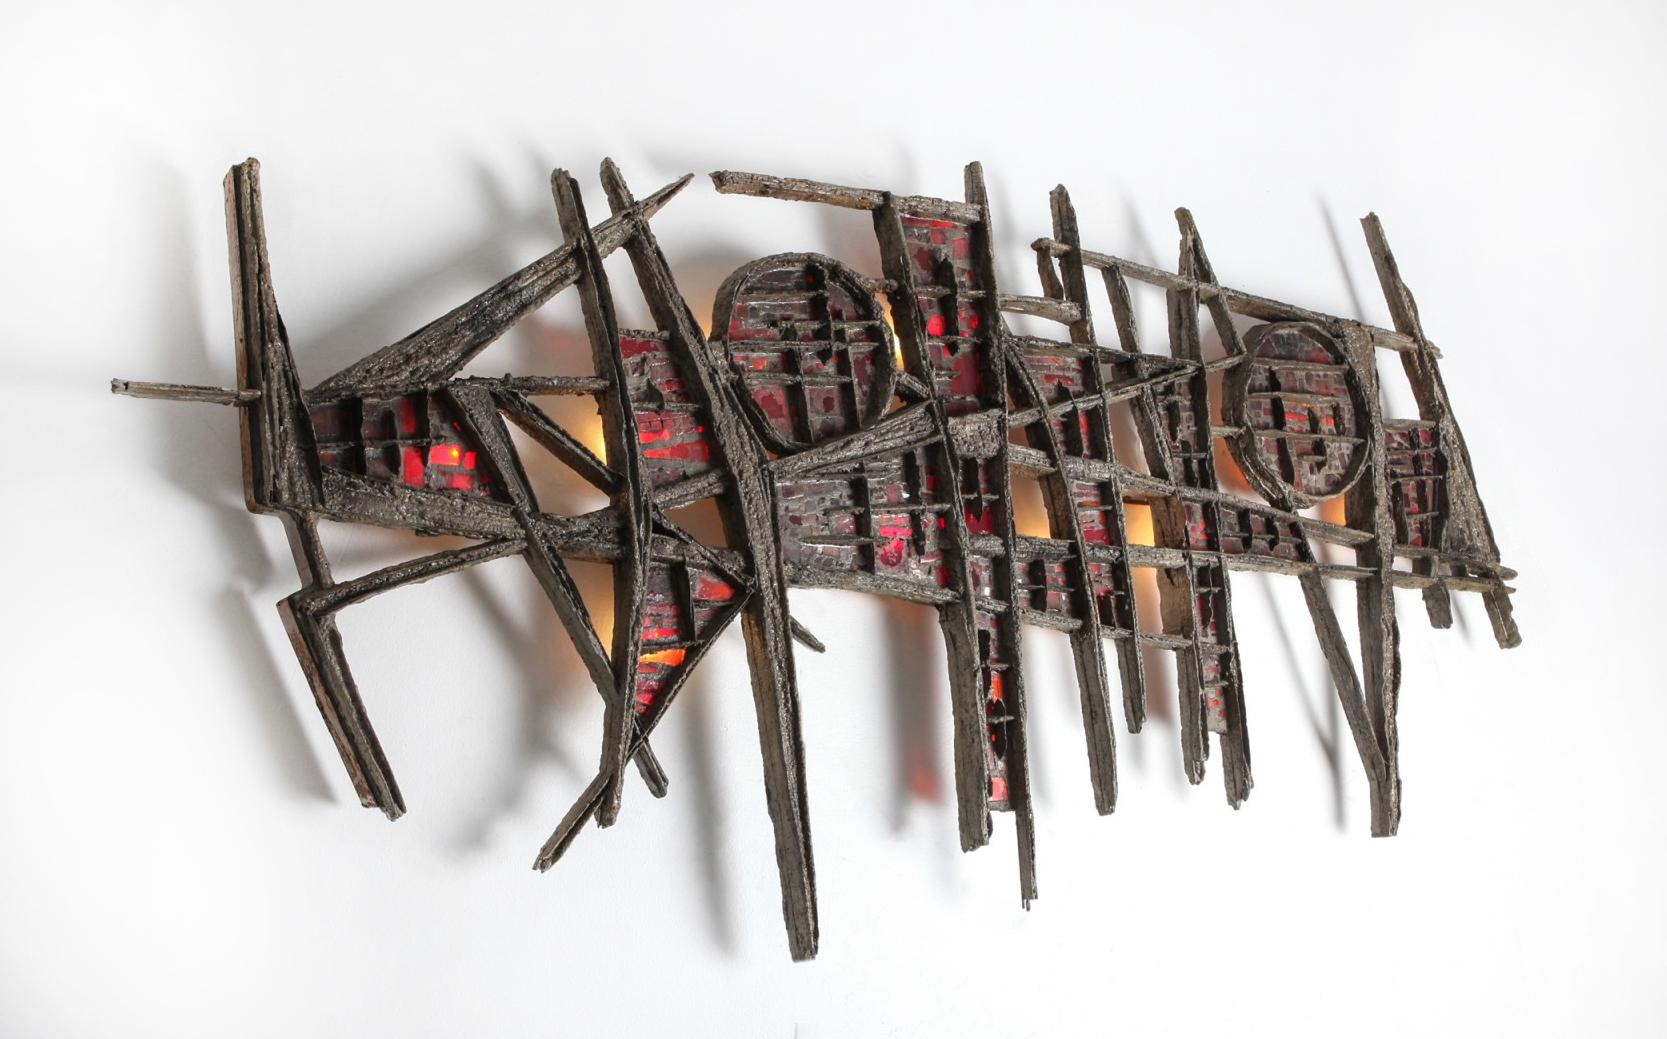 Pia Manu Brutalist Illuminated Wall Sculpture in Steel & Red Stained Glass 1970s For Sale 1